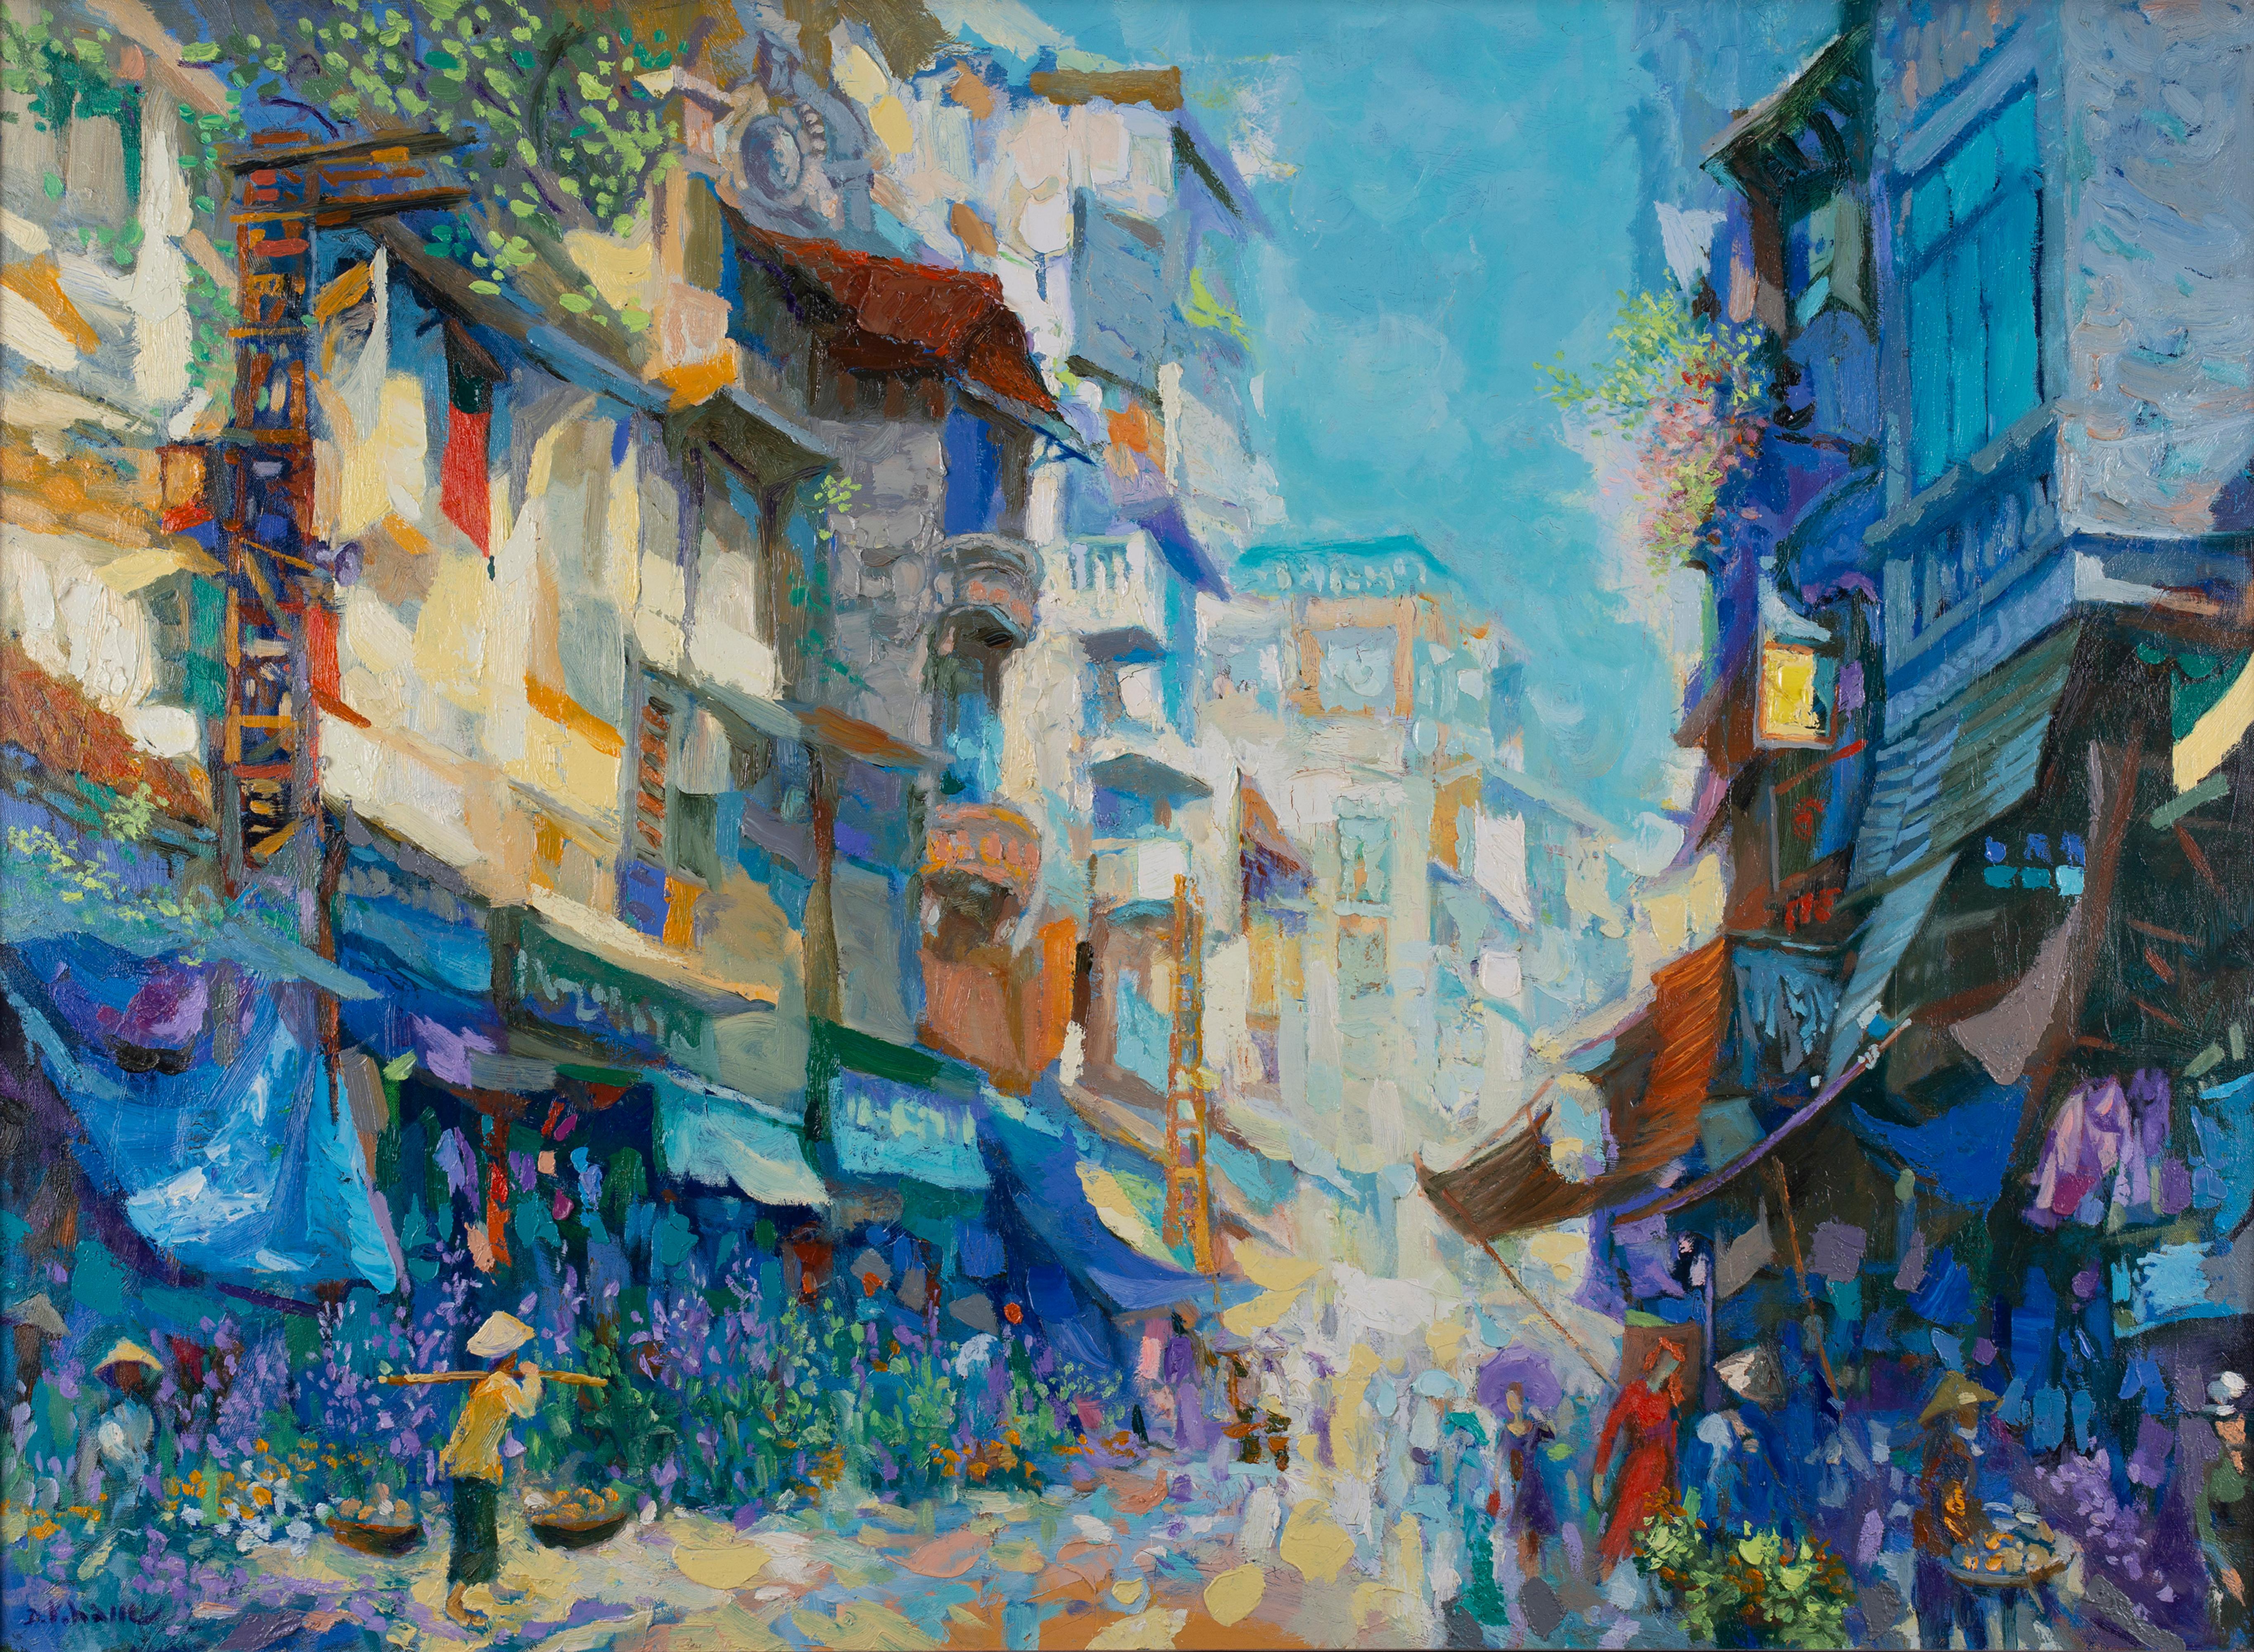 Duong Viet Nam Landscape Painting - 'Hang Bong Street' Impressionist Painting 